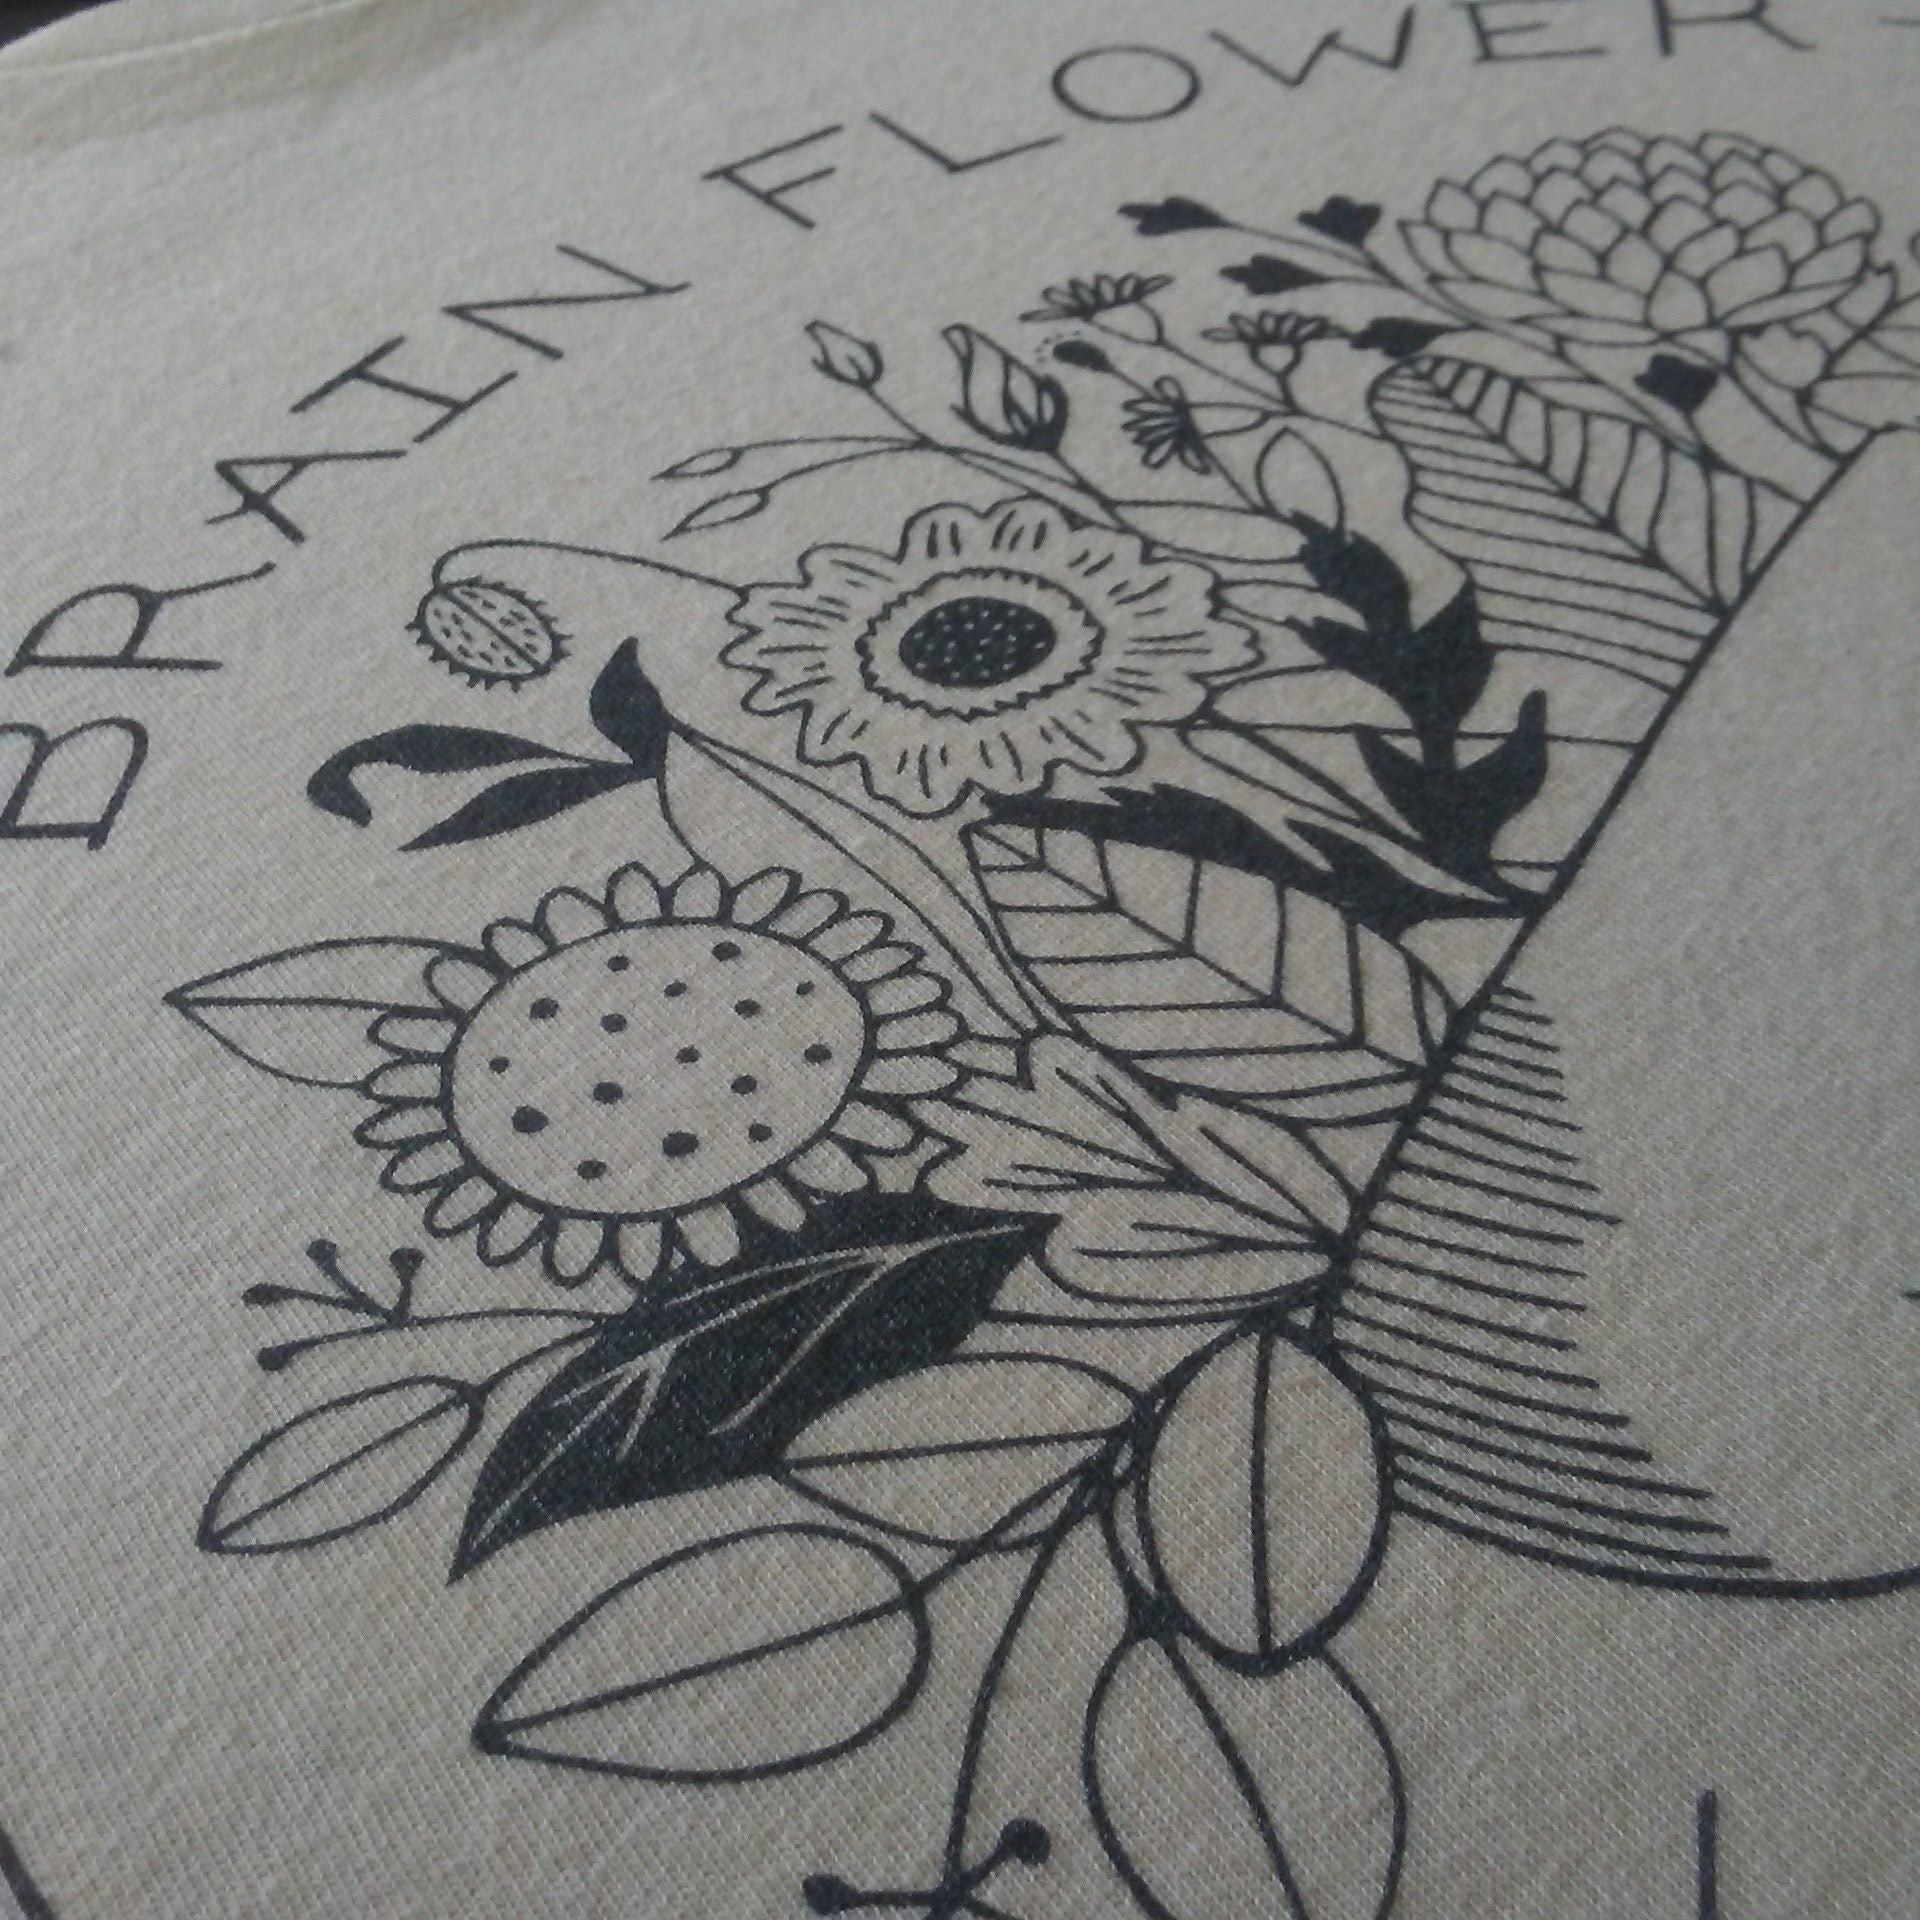 Screen printed t-shirt for Brain Flower Designs, printed by RVA Threads.